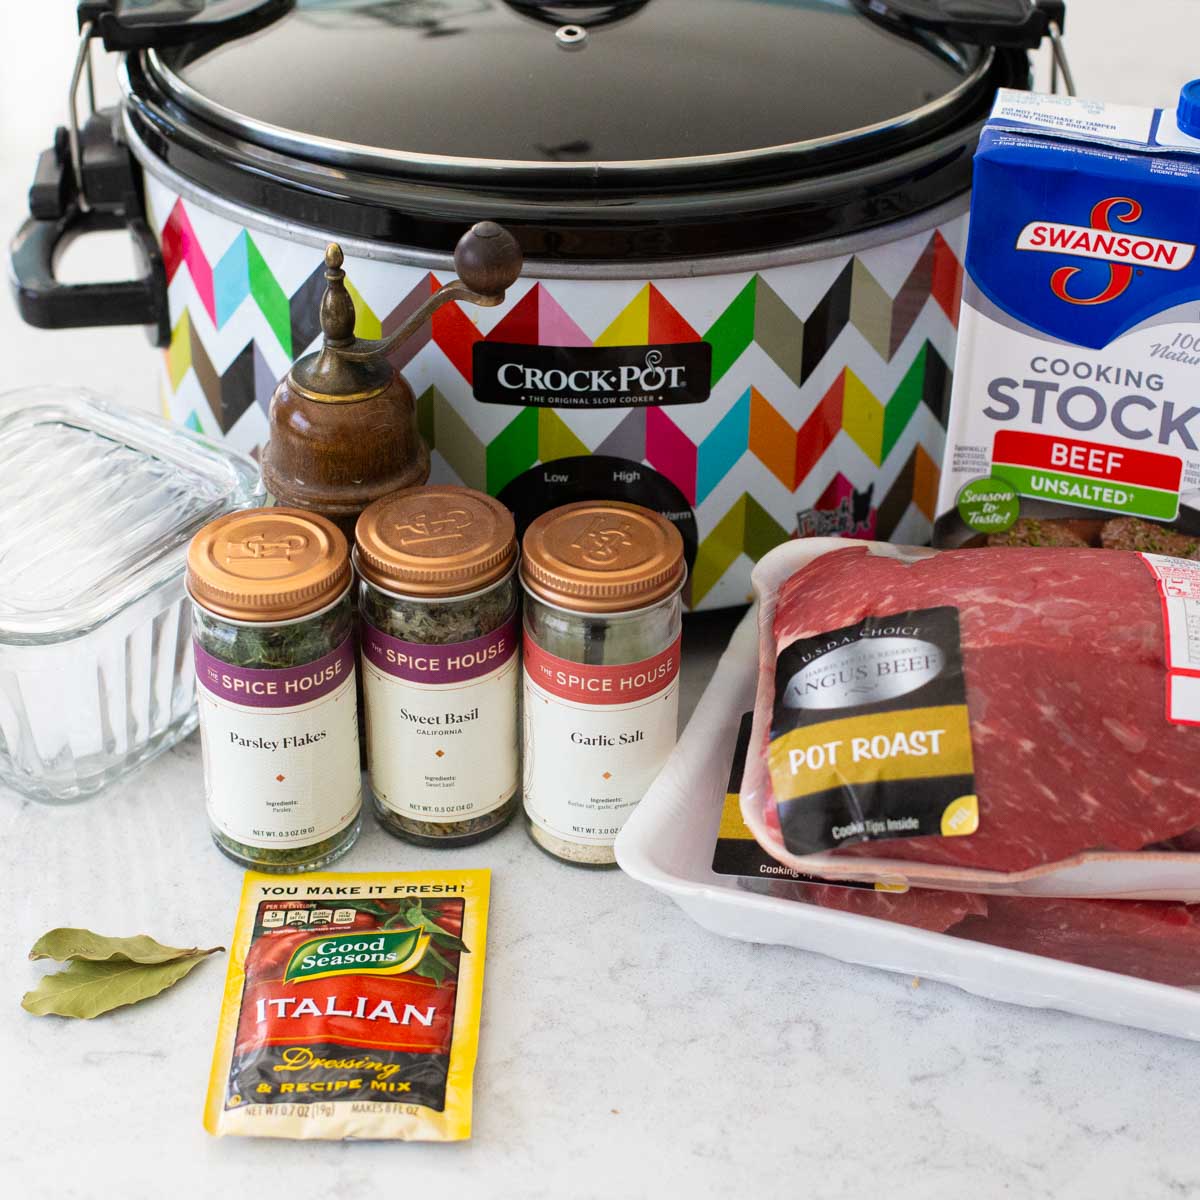 The ingredients for the italian beef are on the counter next to a Crockpot.